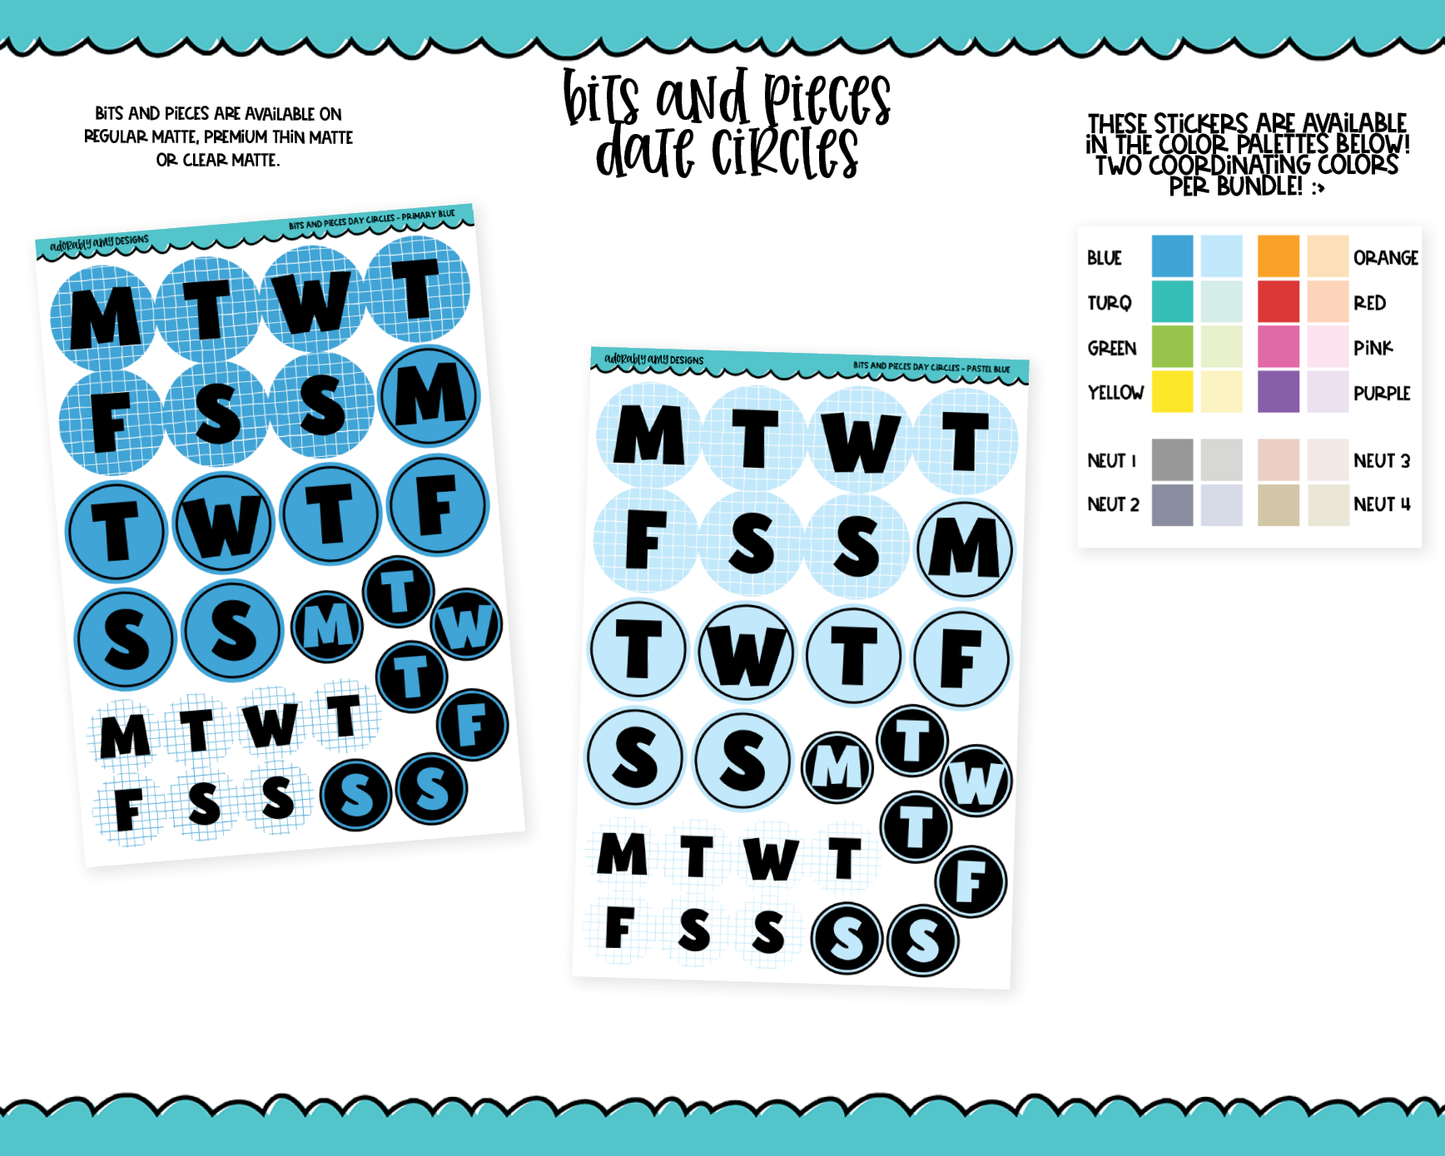 Bits & Pieces Day Circles 2 Sizes Kit Addons for Any Planner in 13 different Color Schemes